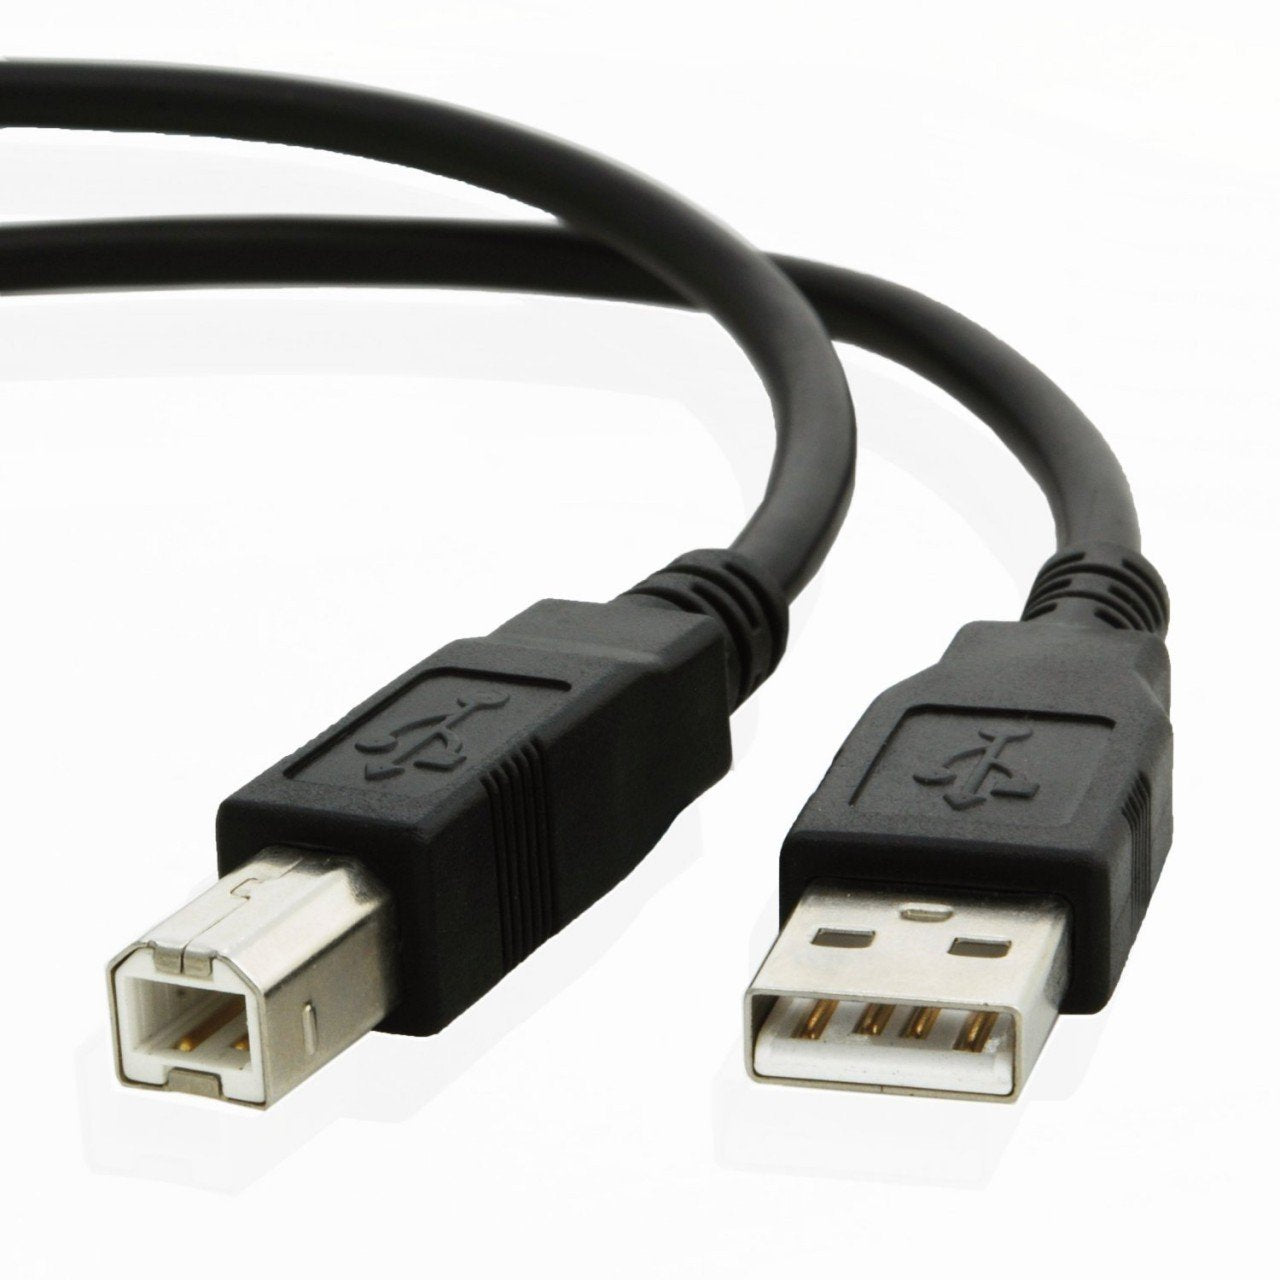 USB cable for Casio KEYBOARD CTK-3500